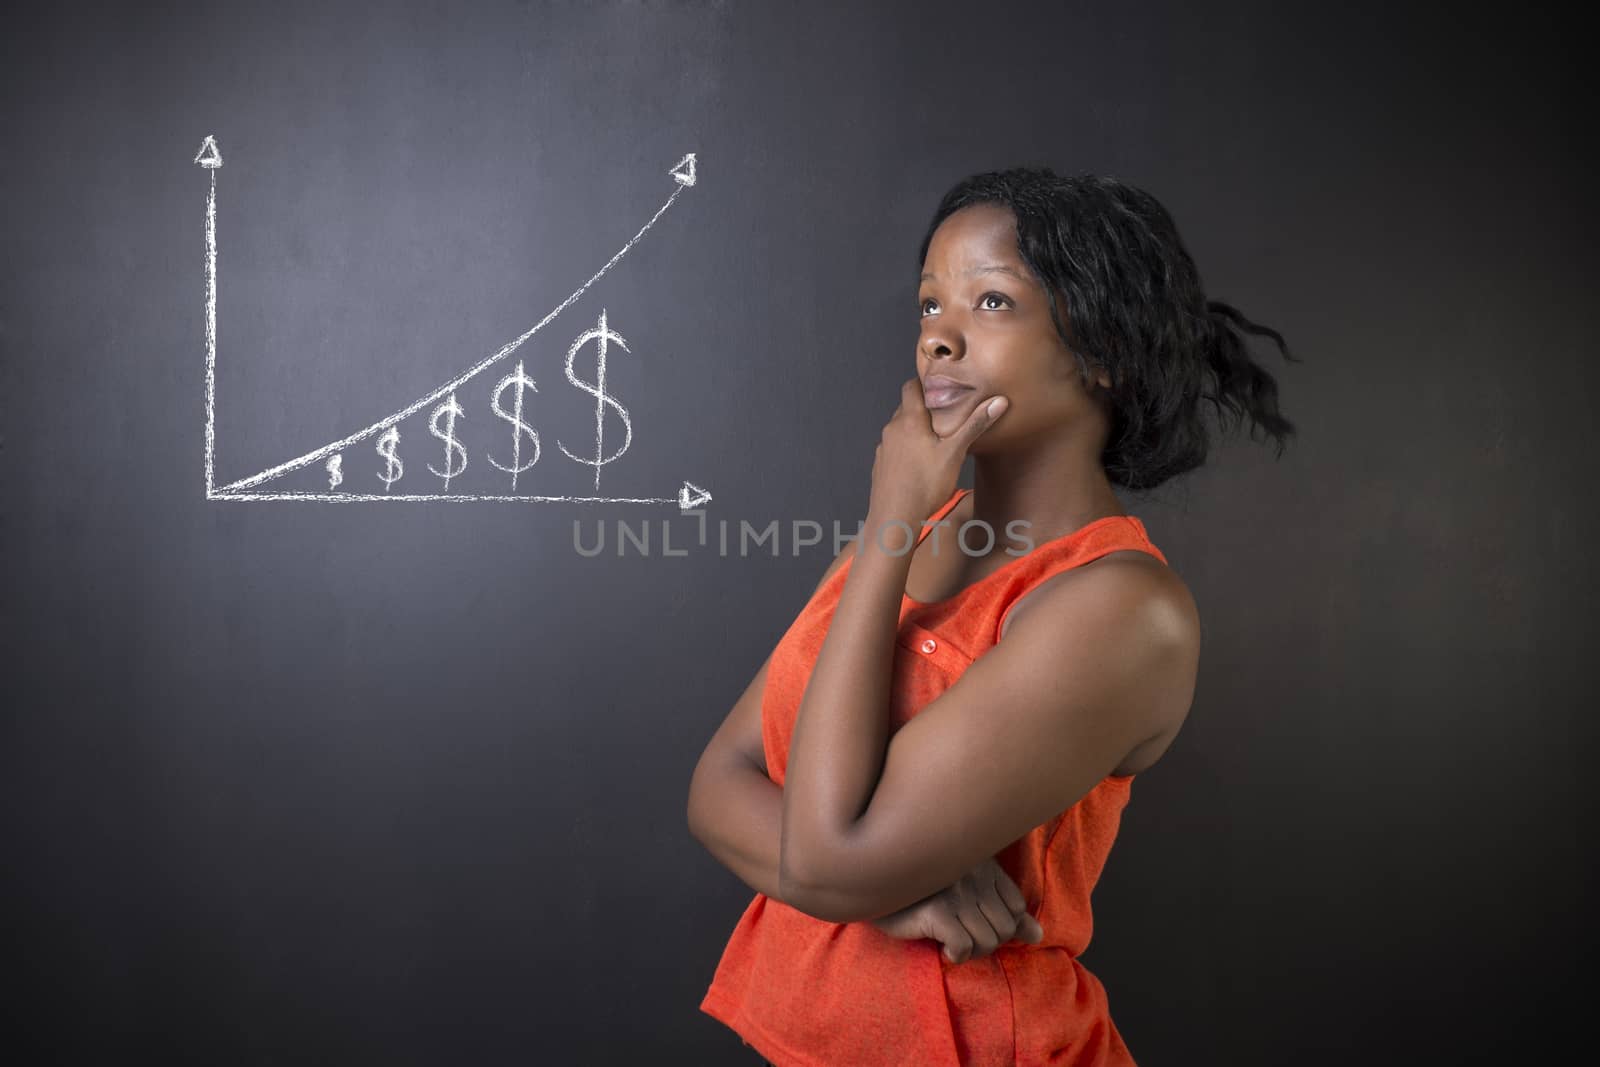 South African or African American woman teacher or student against blackboard background thinking about chalk money graph concept